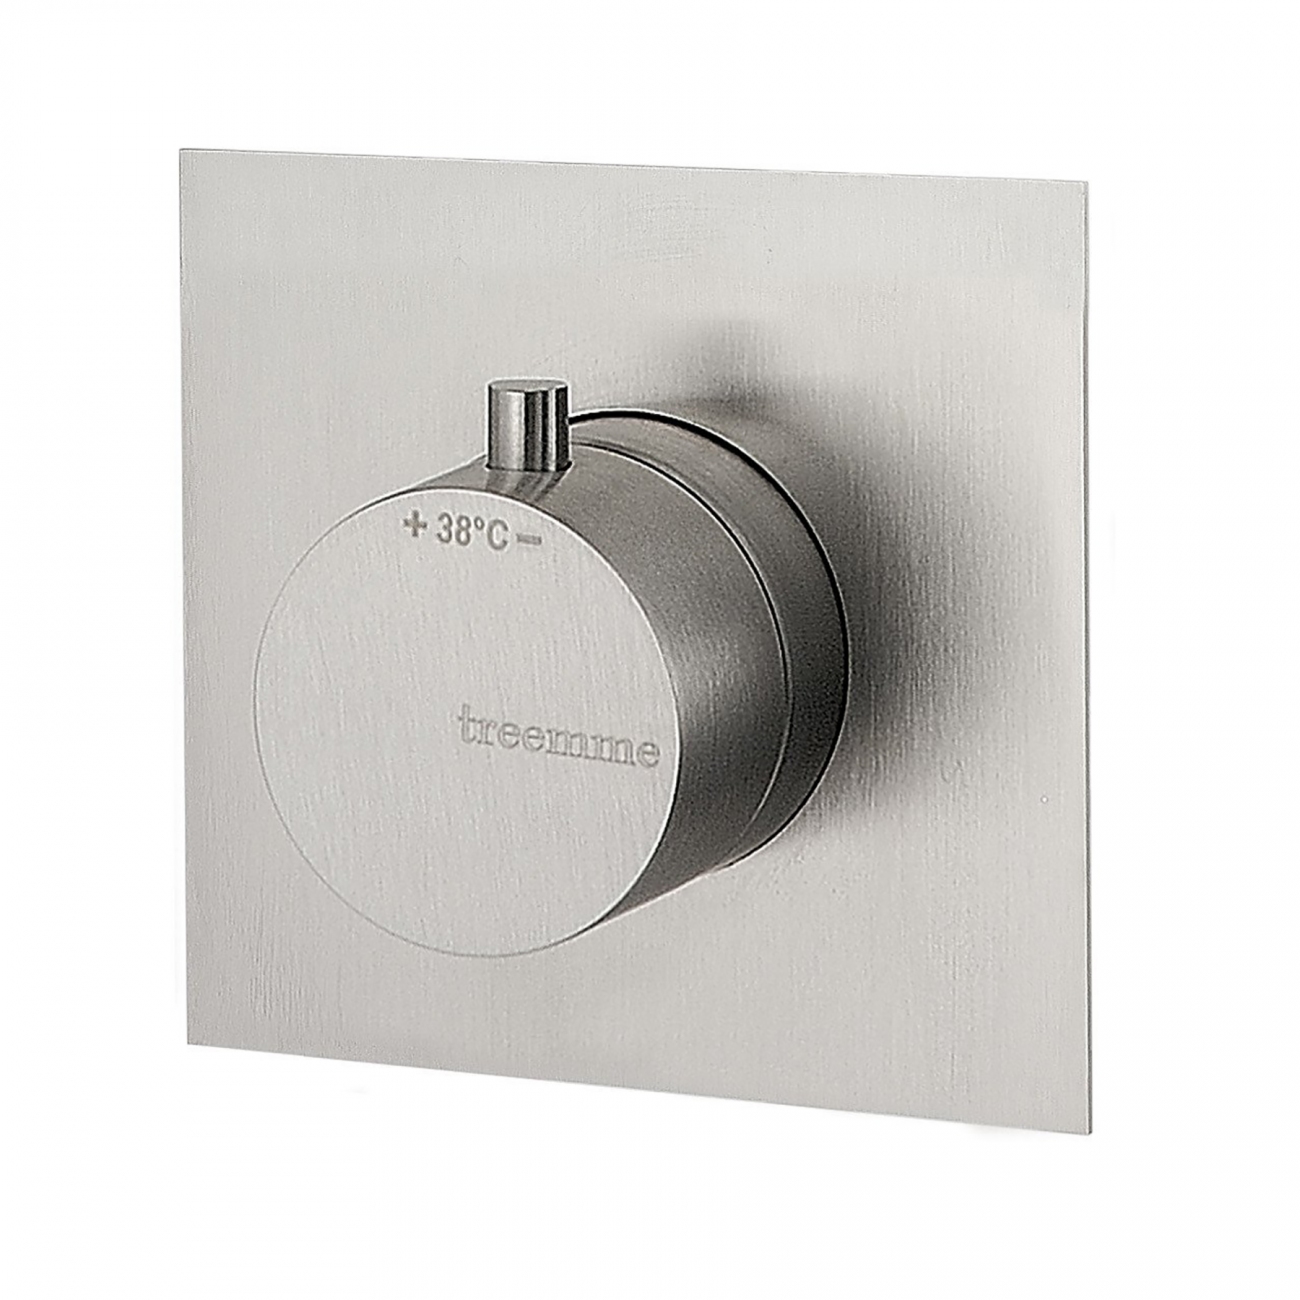 Treemme 5mm thermostatic shower mix